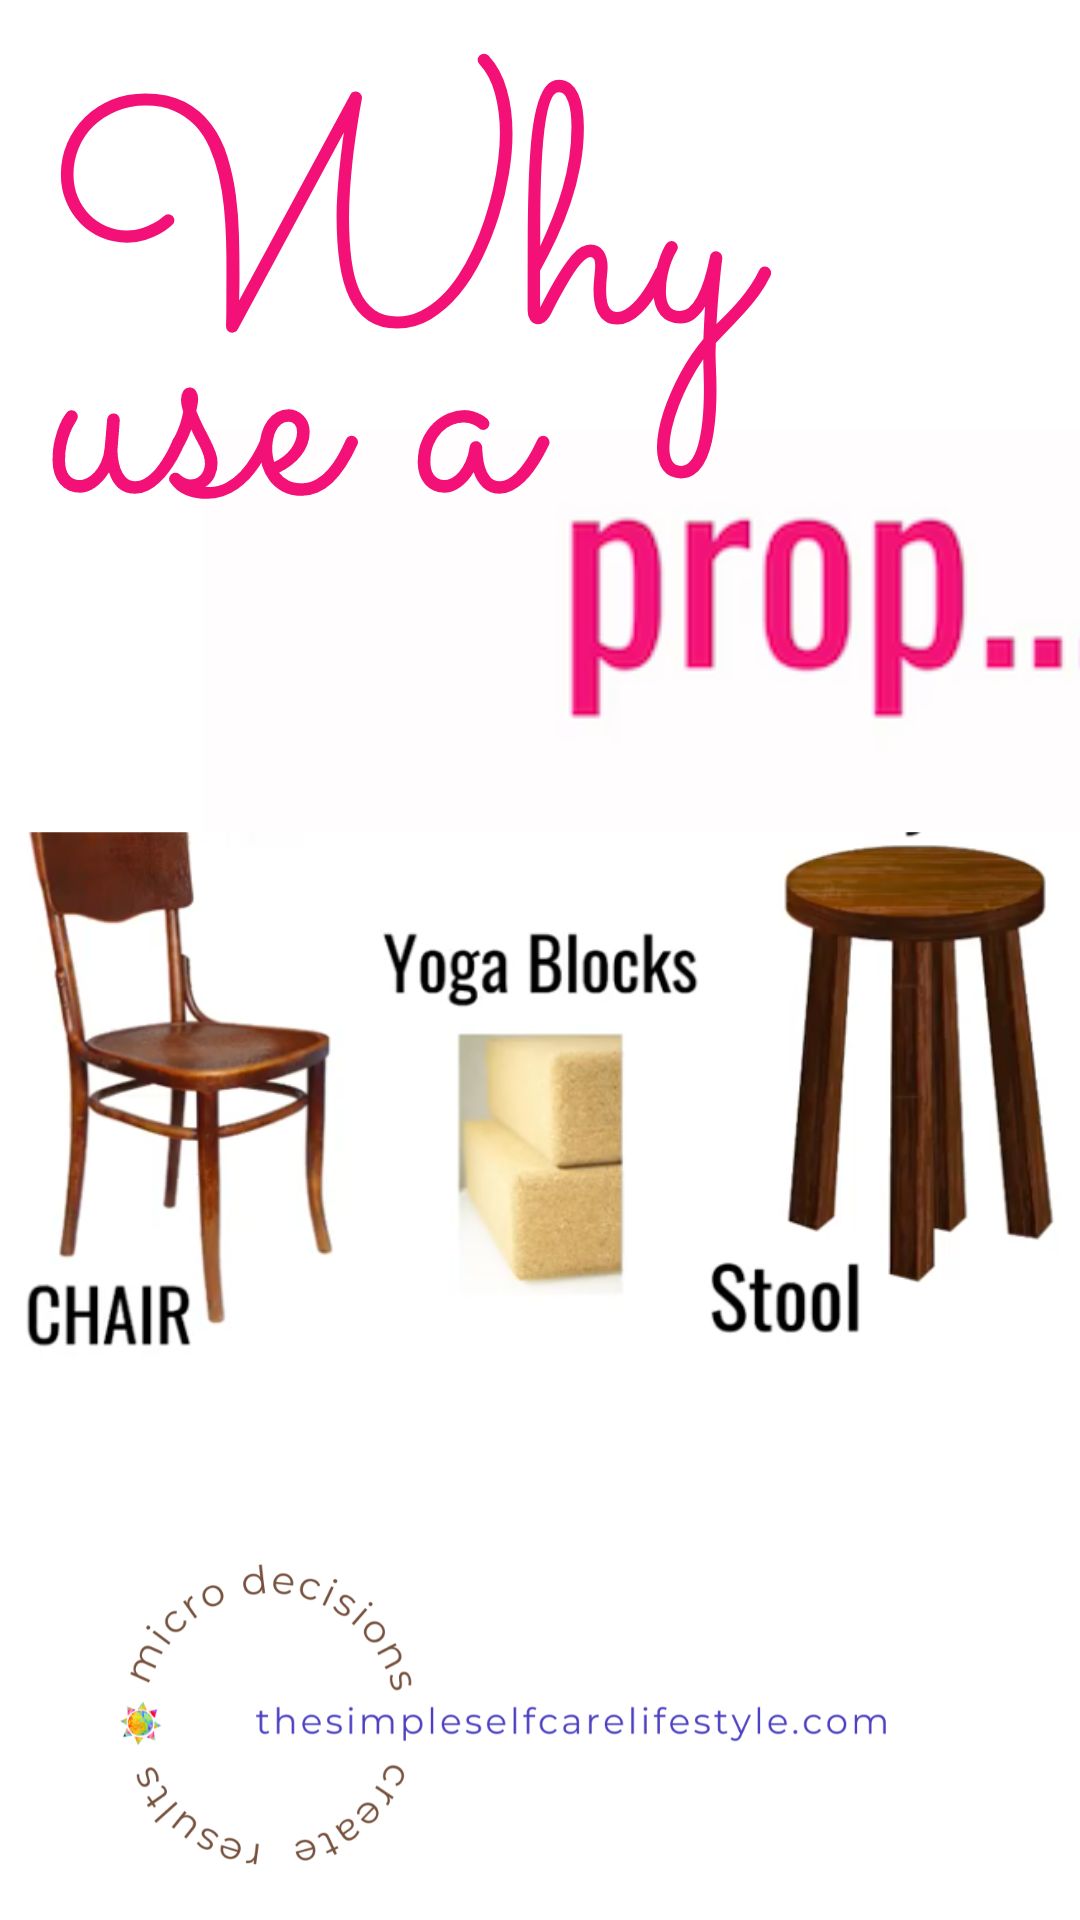 why use a prop for hamstring stretches? A Chair, a step stool or Yoga Blocks